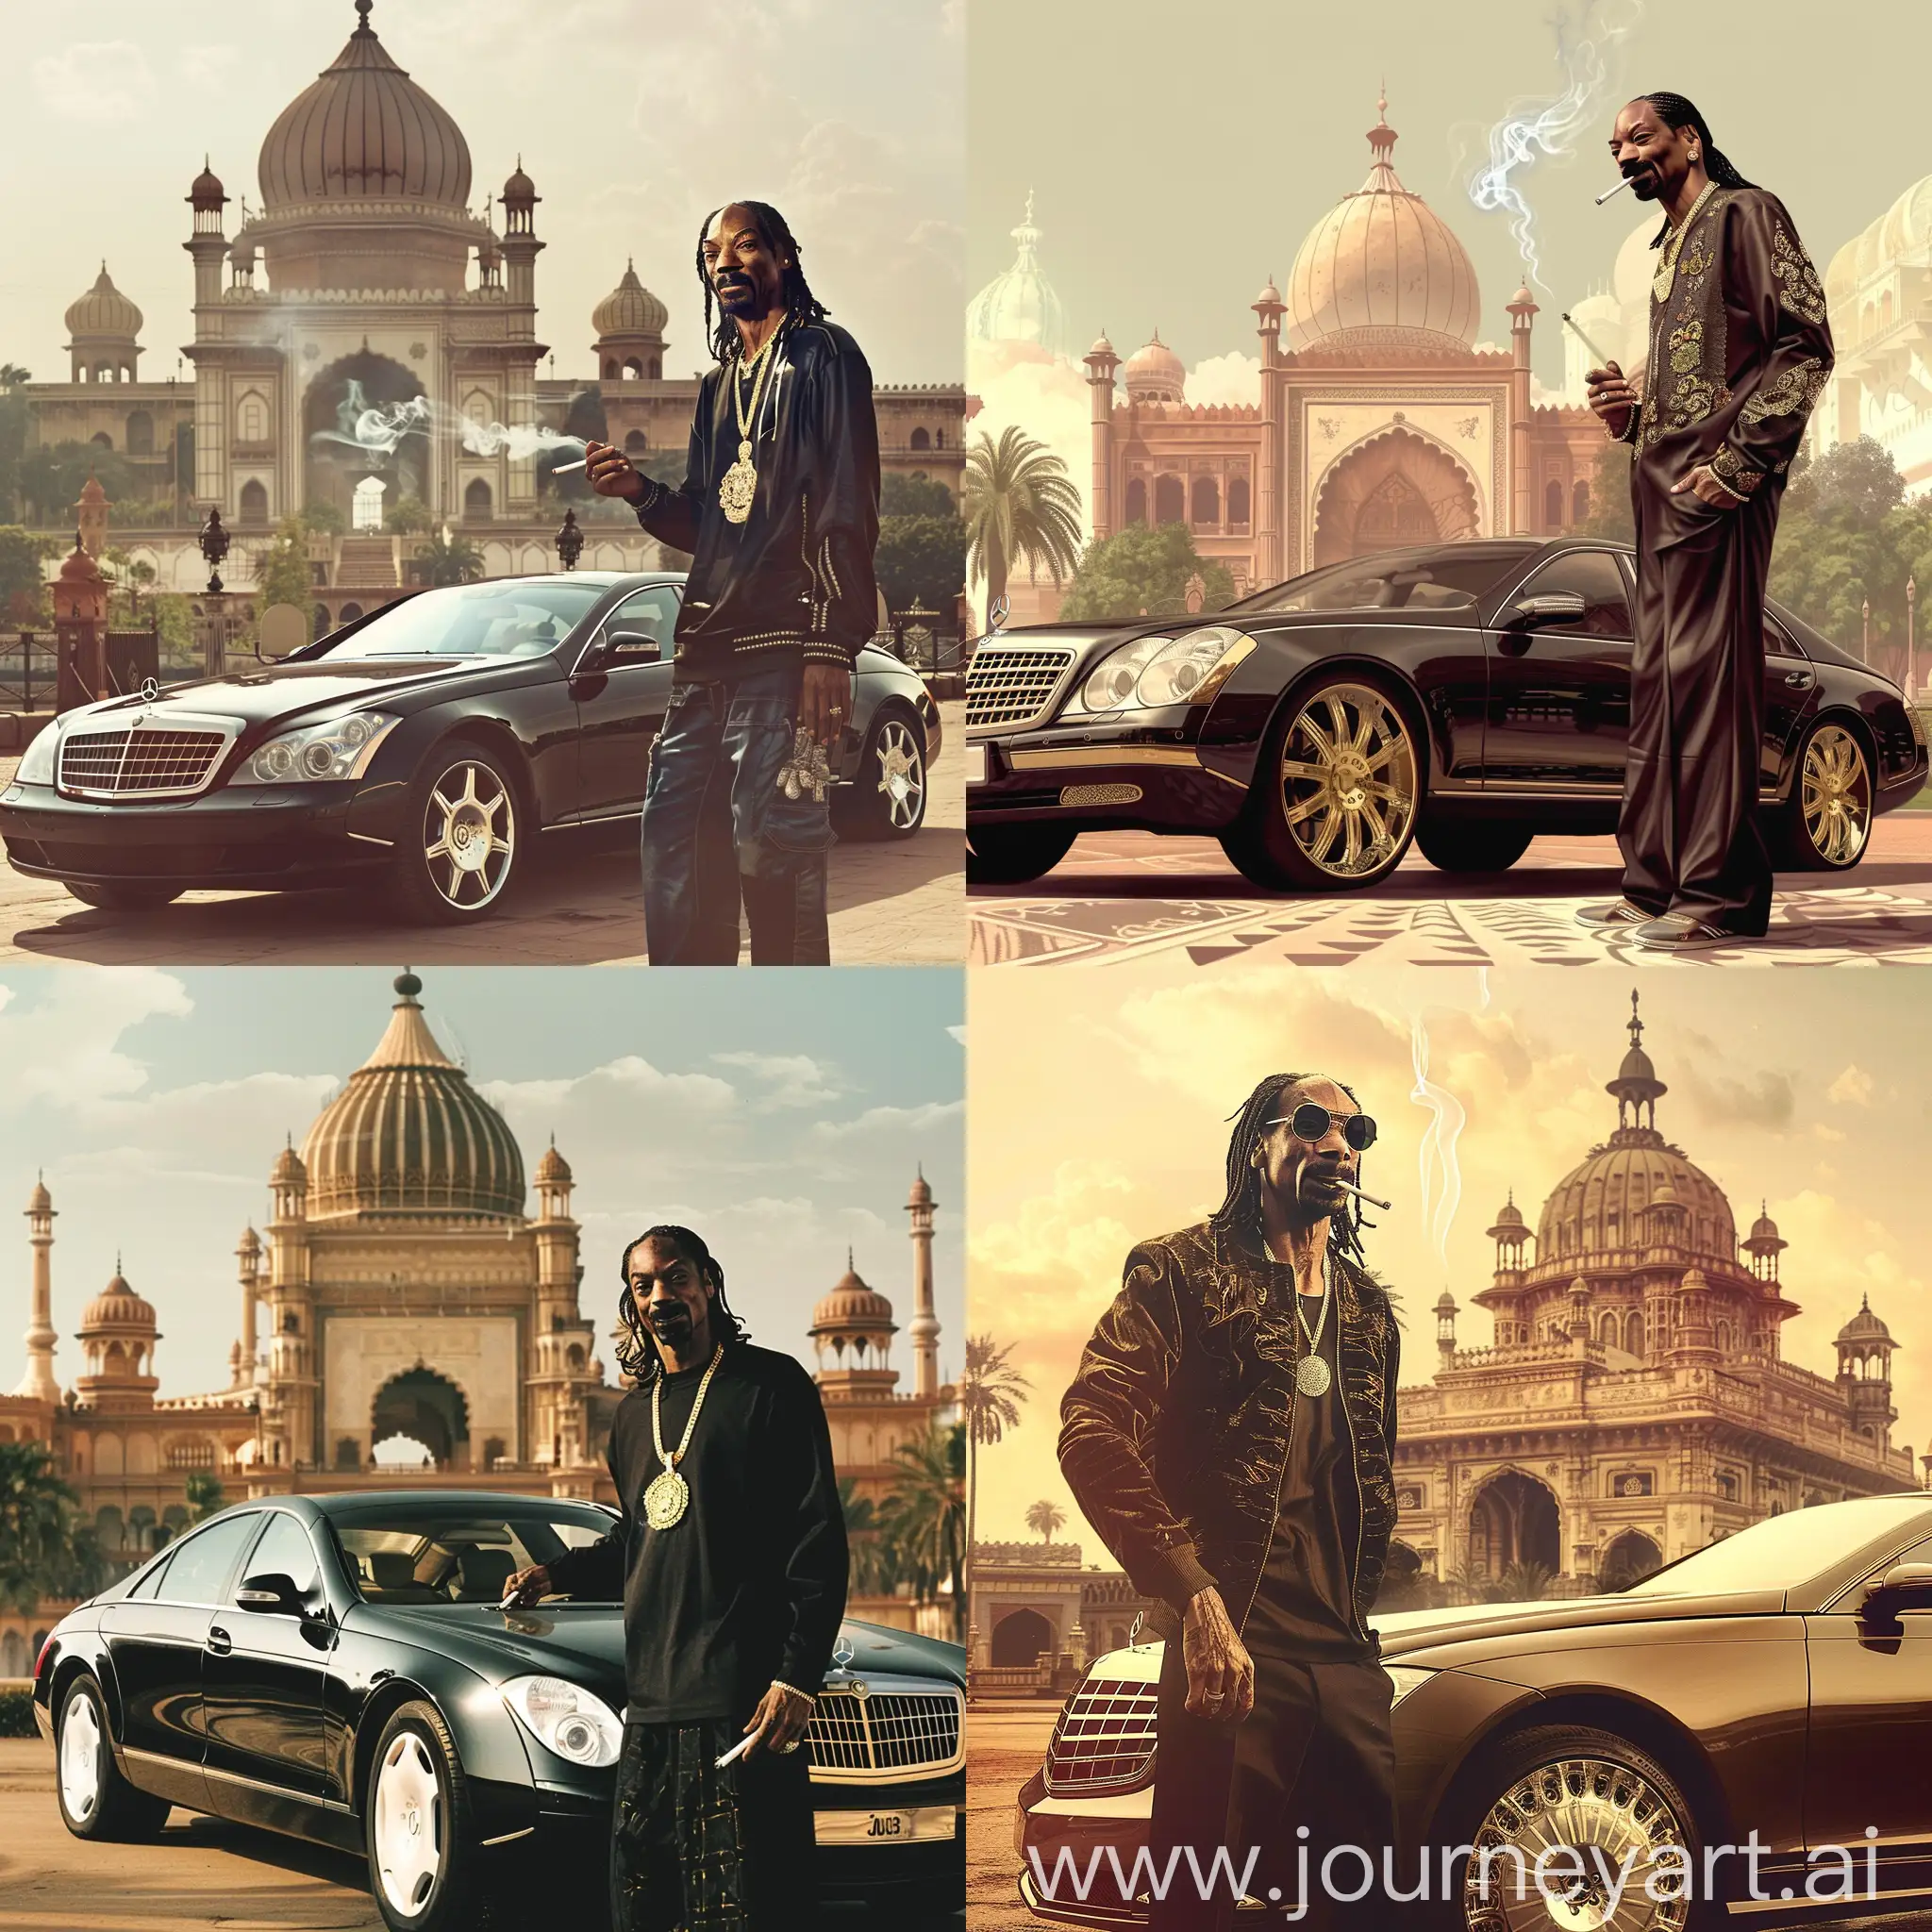 Snoop-Dogg-Posing-with-a-Maybach-and-Cigarette-in-Front-of-Magnificent-Palace